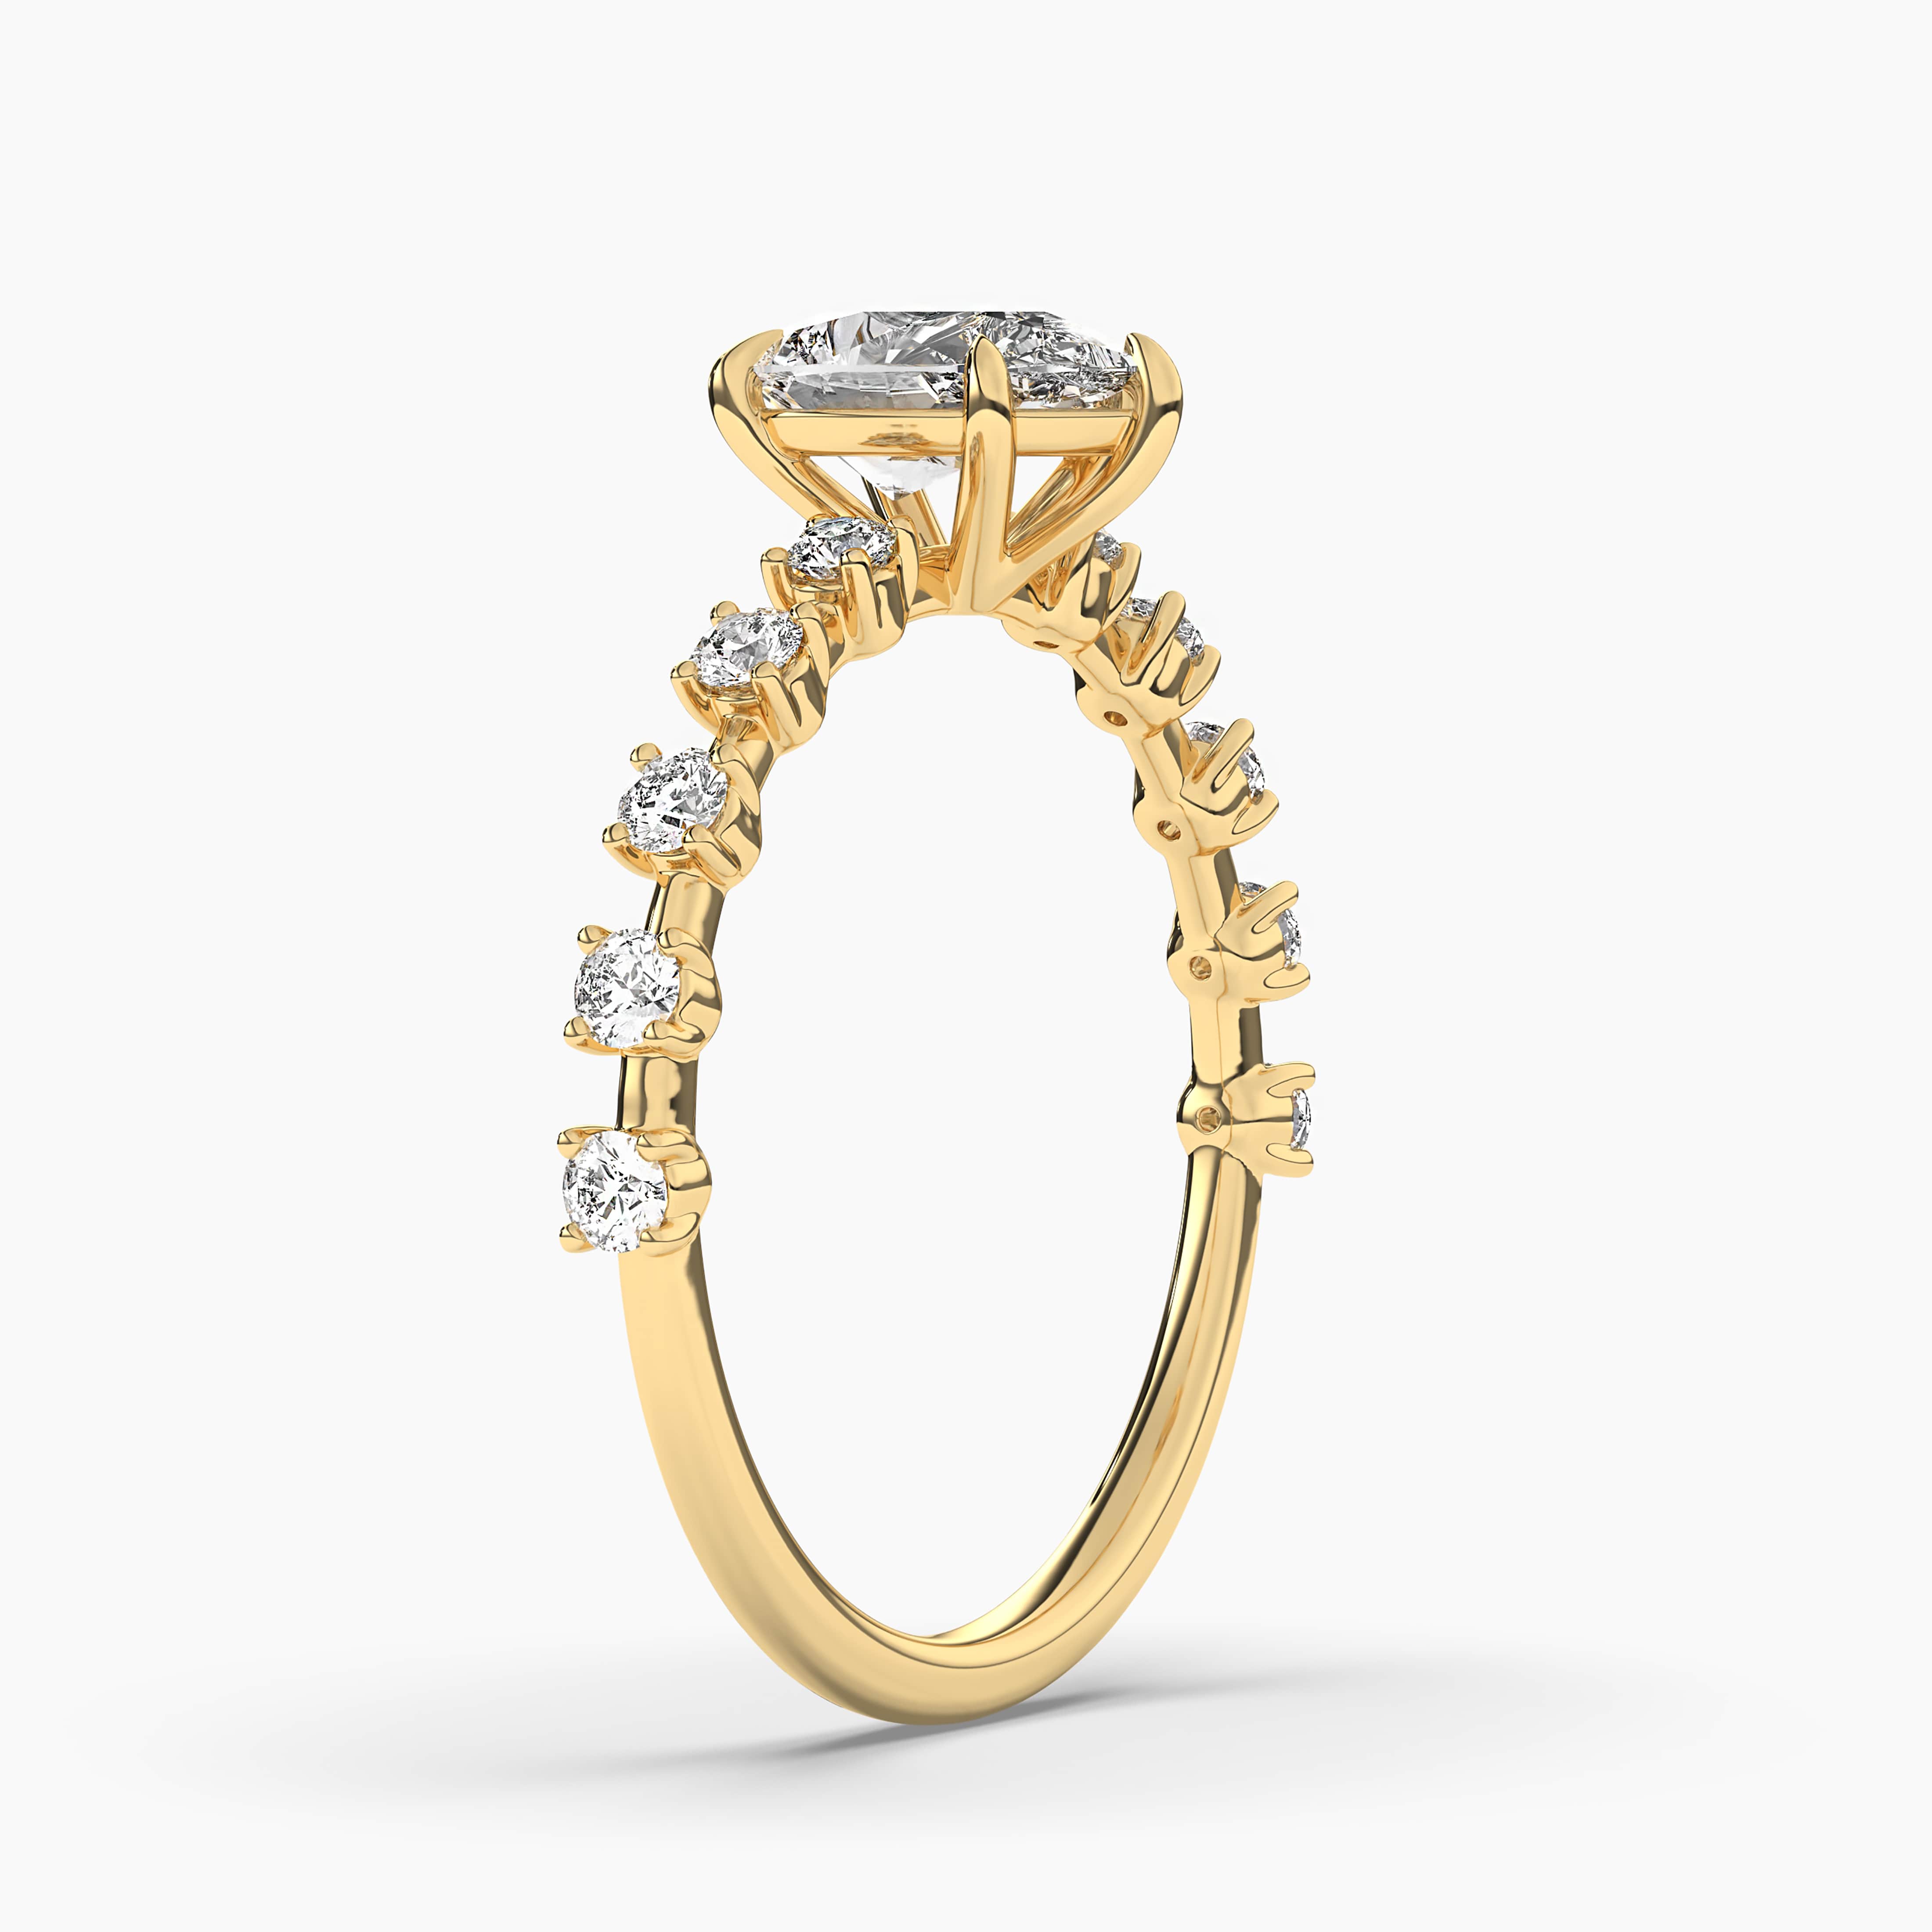 SHAPED ROYAL BLUE SAPPHIRE ENGAGEMENT RING IN YELLOW GOLD